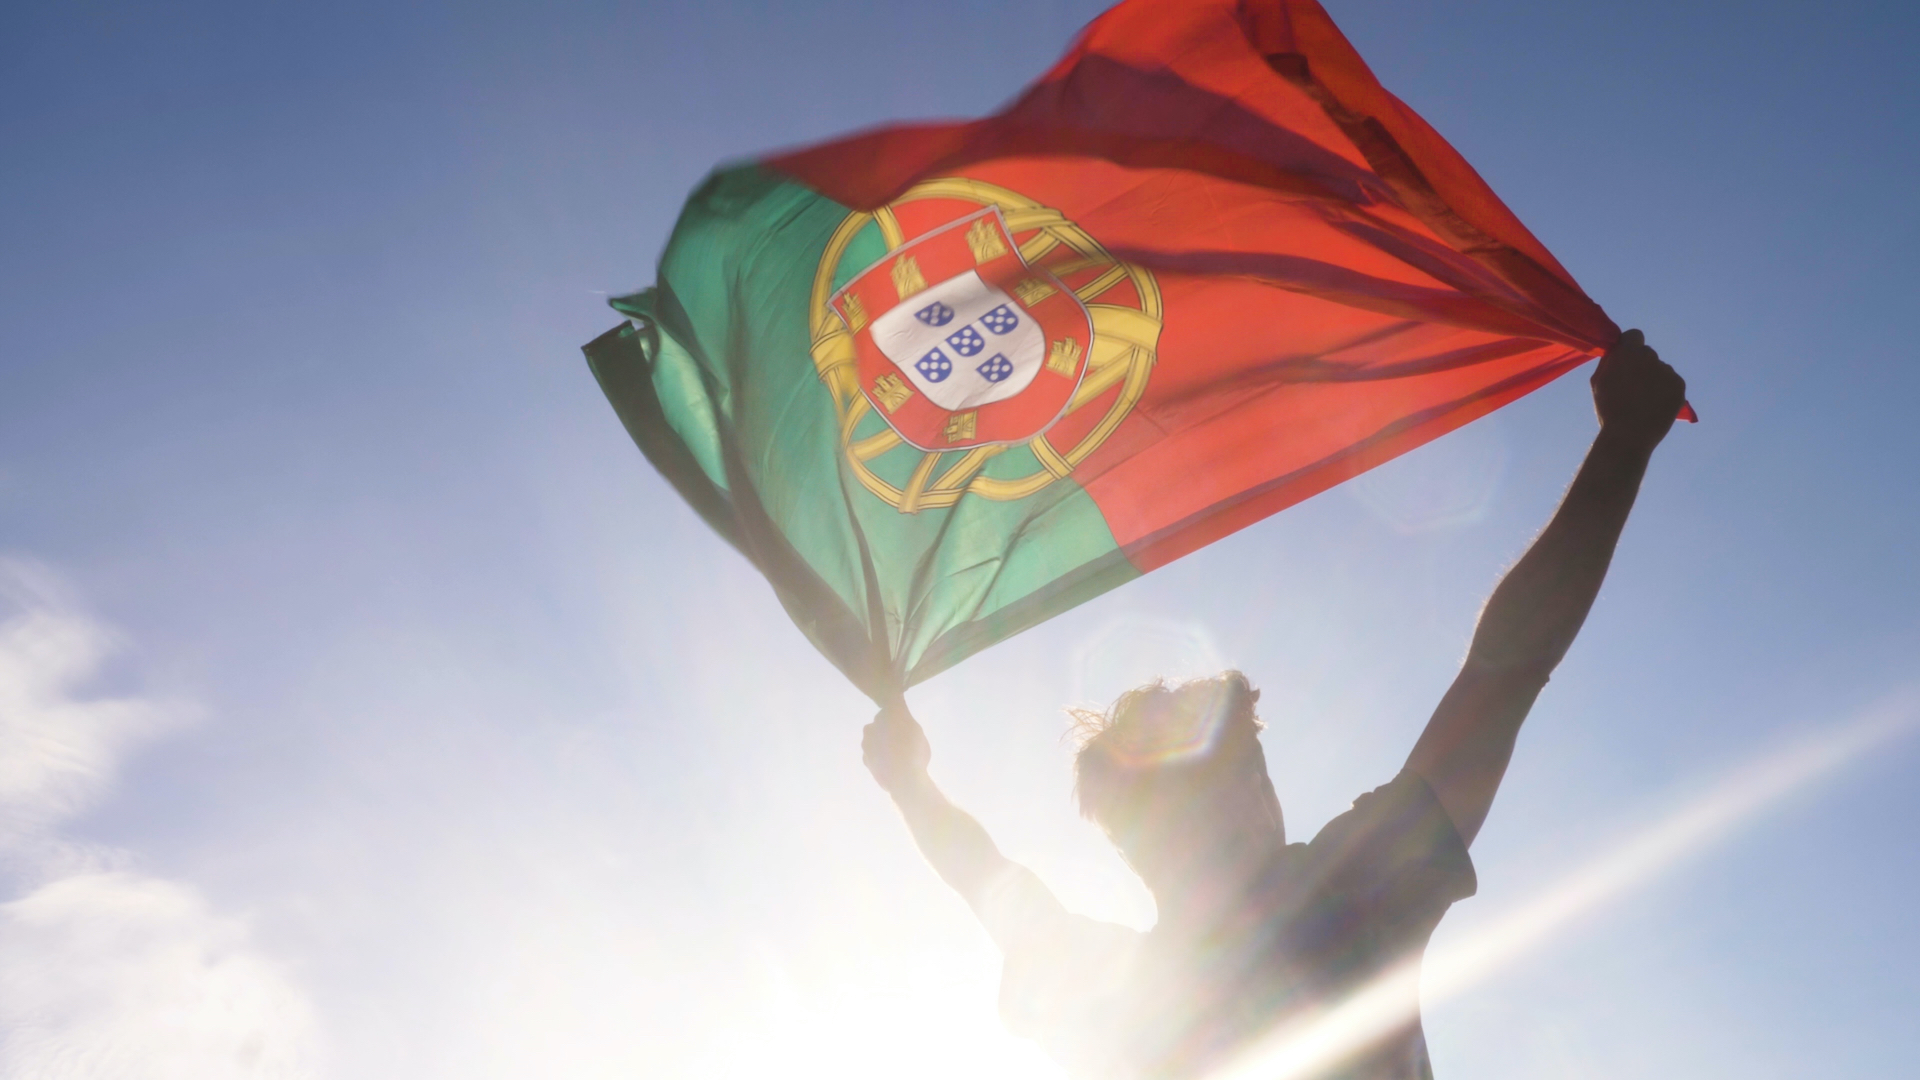 A person holding the Portuguese flag aloft in the sunshine 